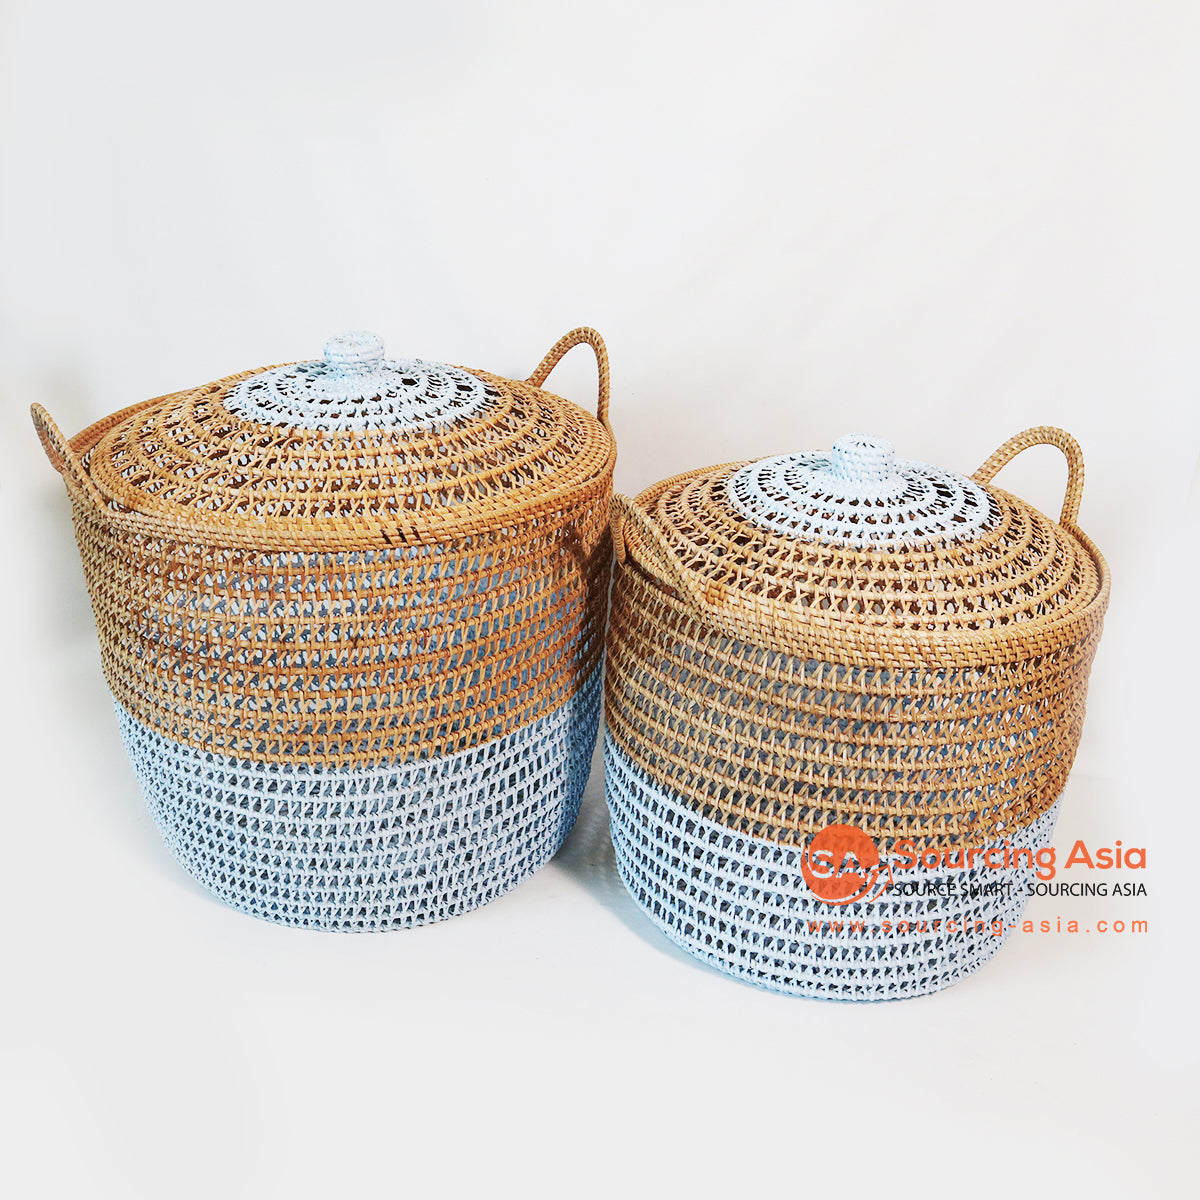 MTIC058-1 SET OF TWO NATURAL AND BLUE WOVEN RATTAN BASKETS WITH LID AND HANDLE